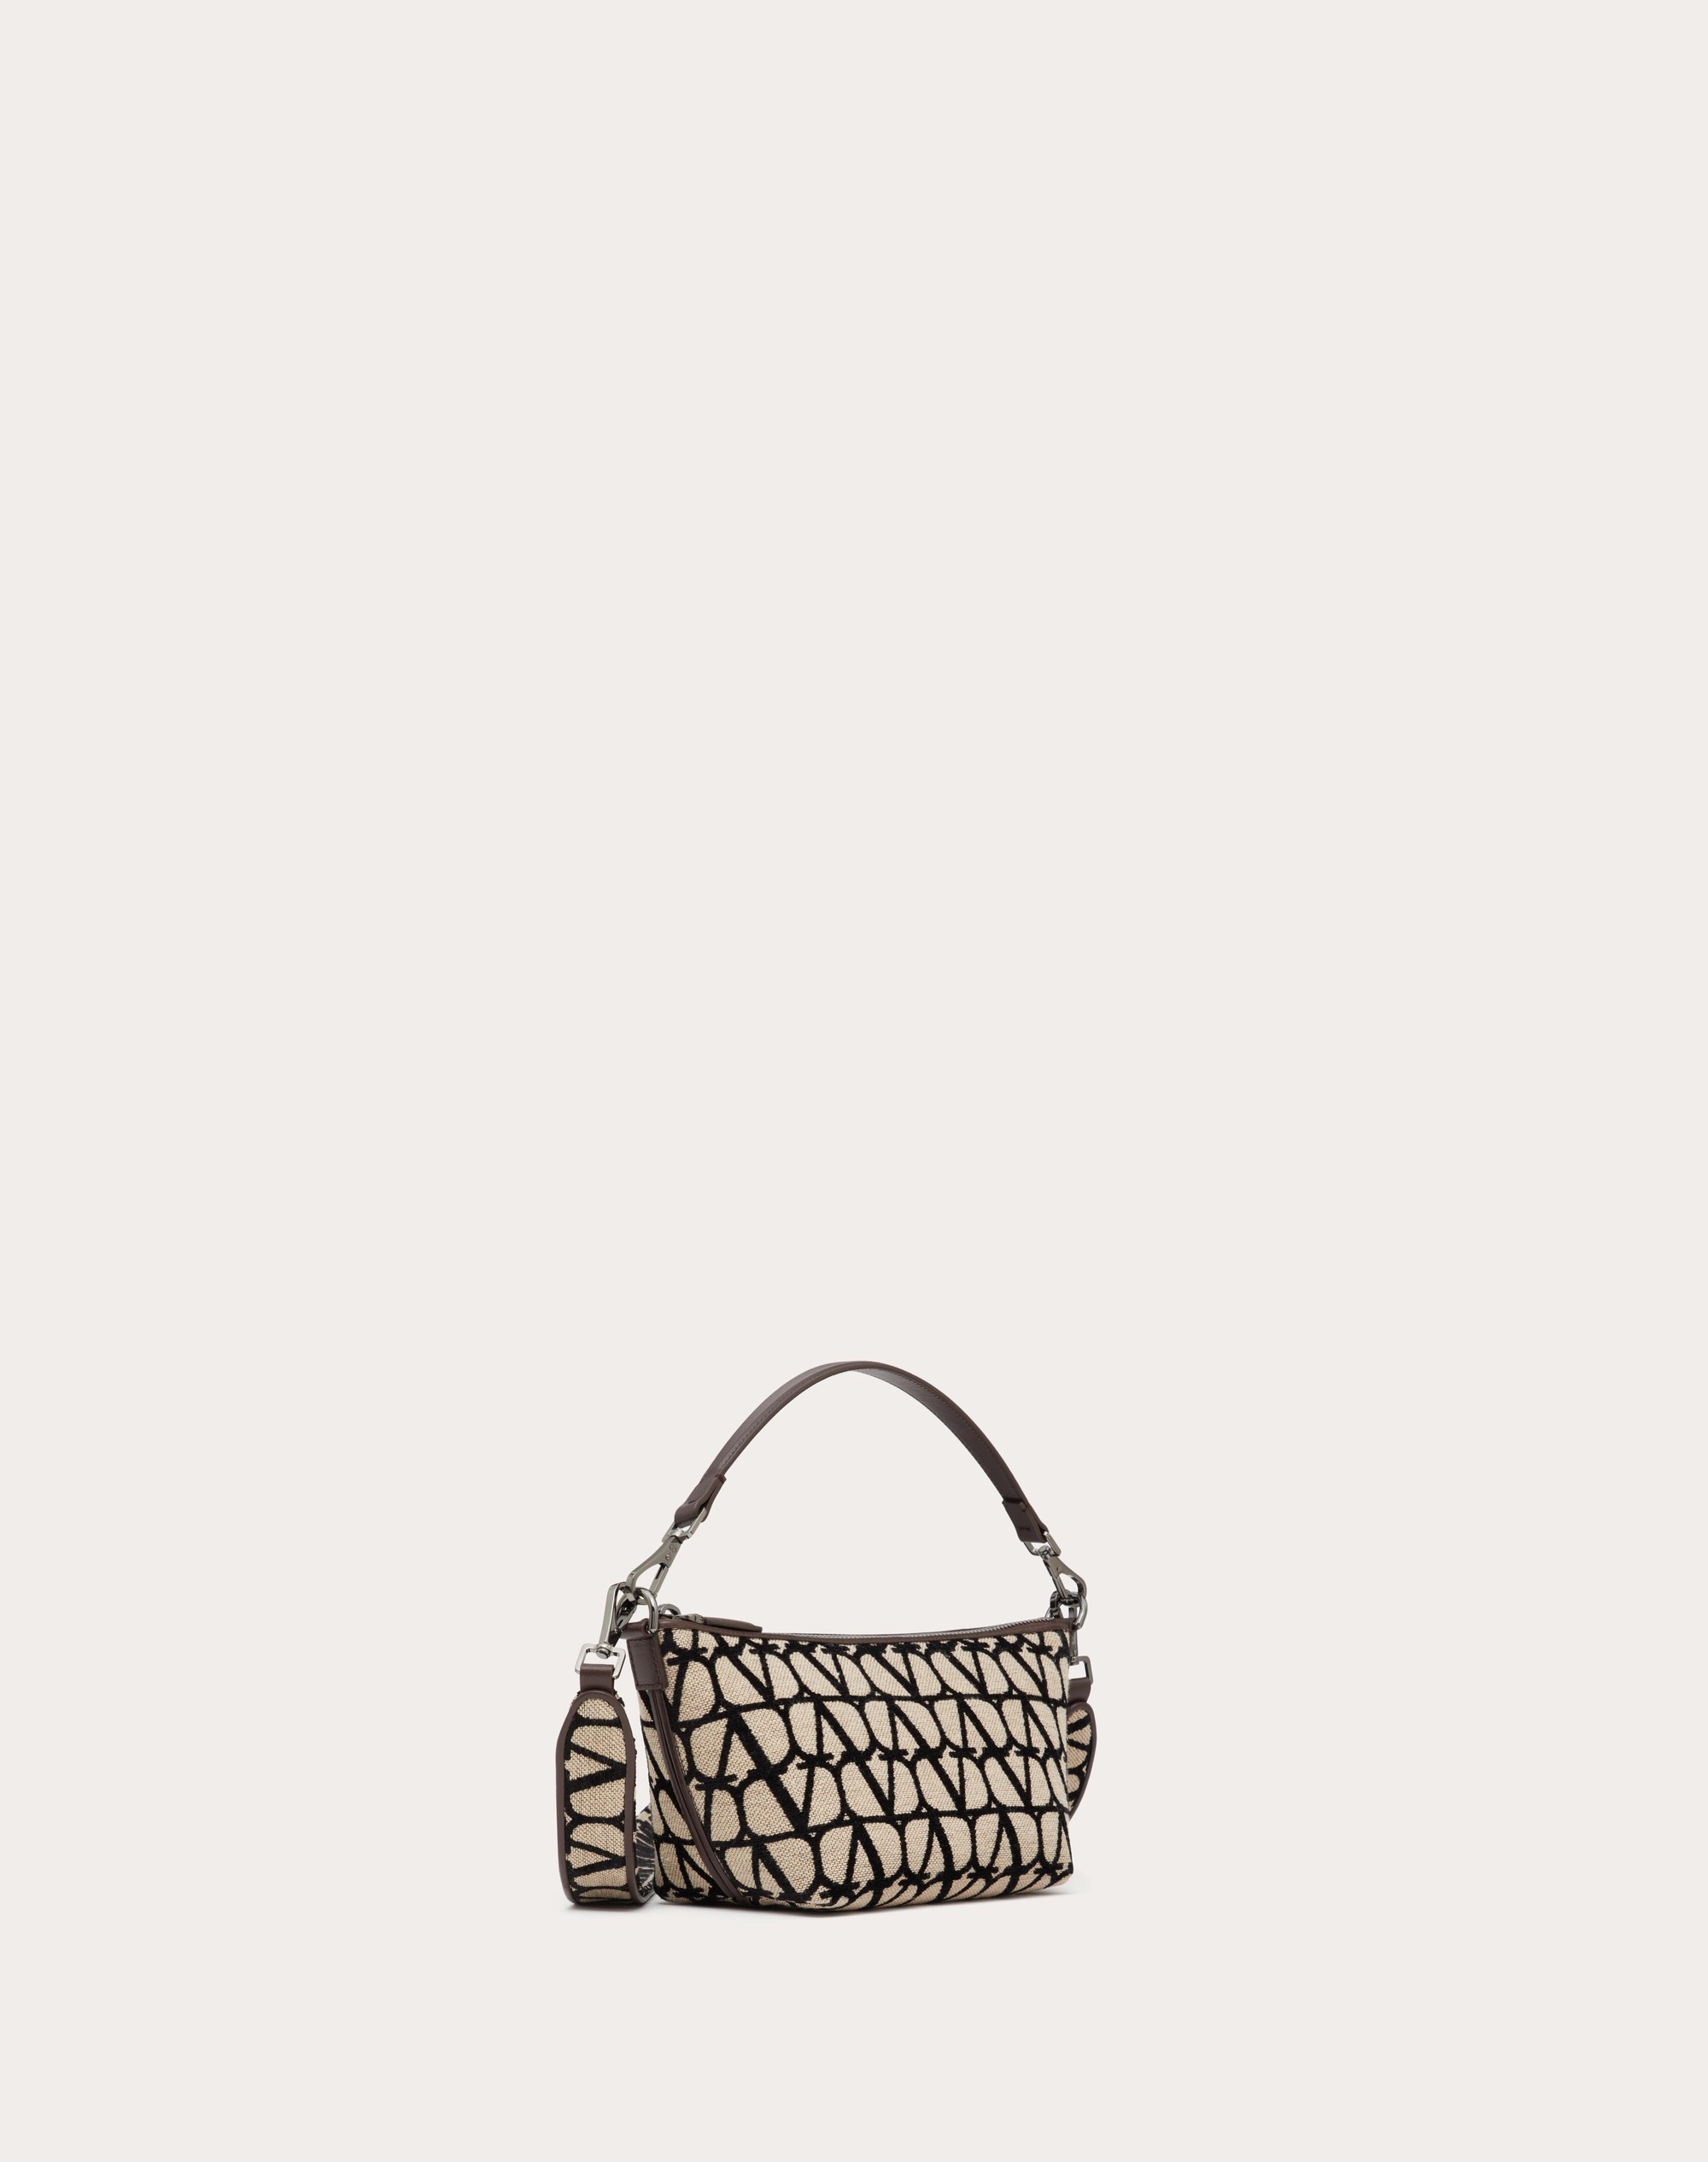 TOILE ICONOGRAPHE SHOULDER BAG WITH LEATHER DETAILS - 3